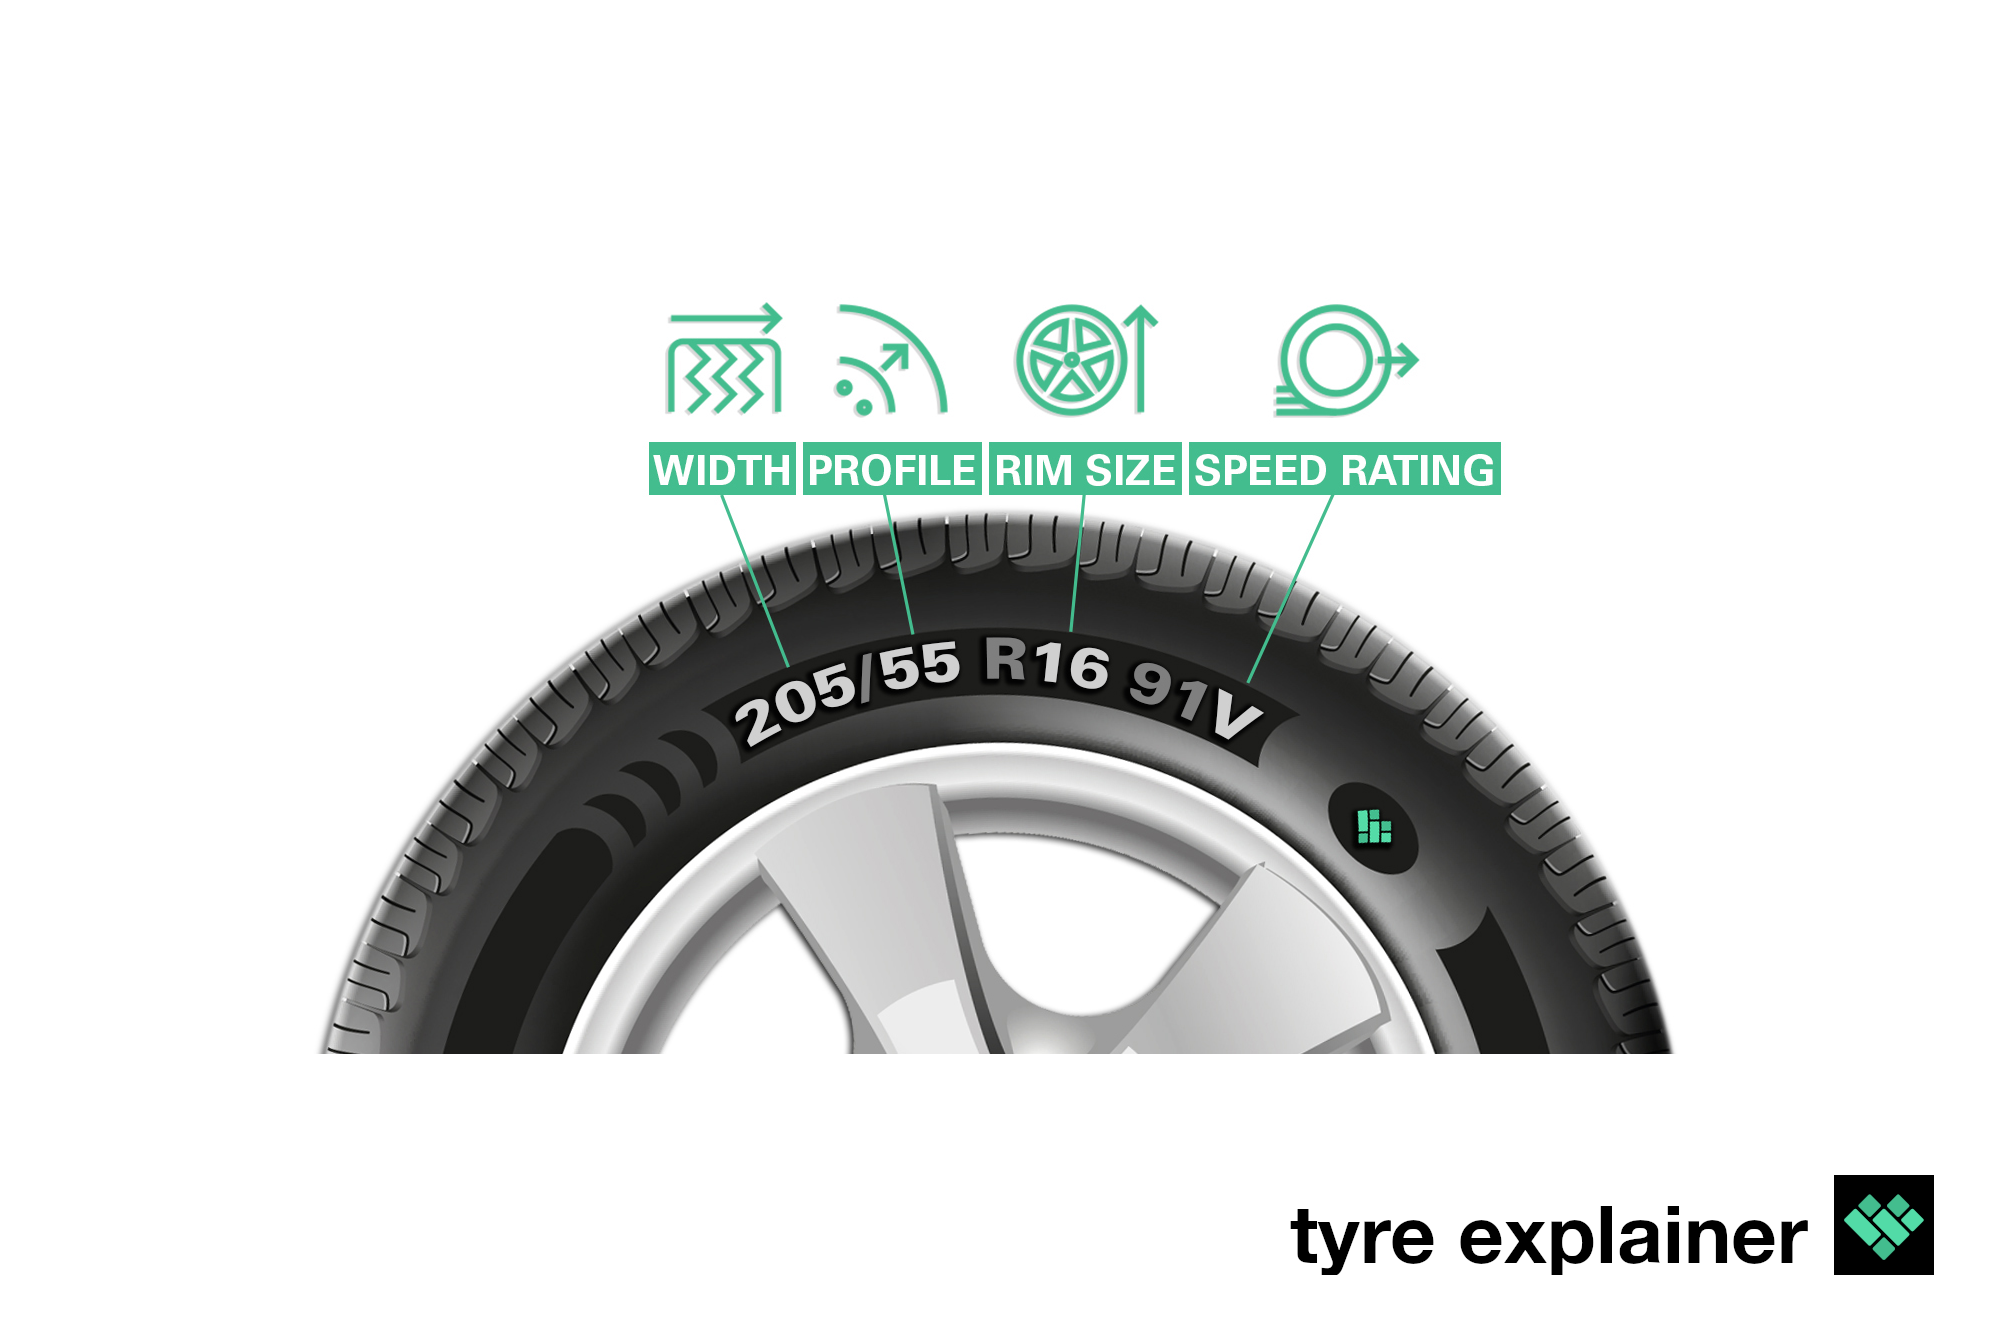 How do I find my tyre size?